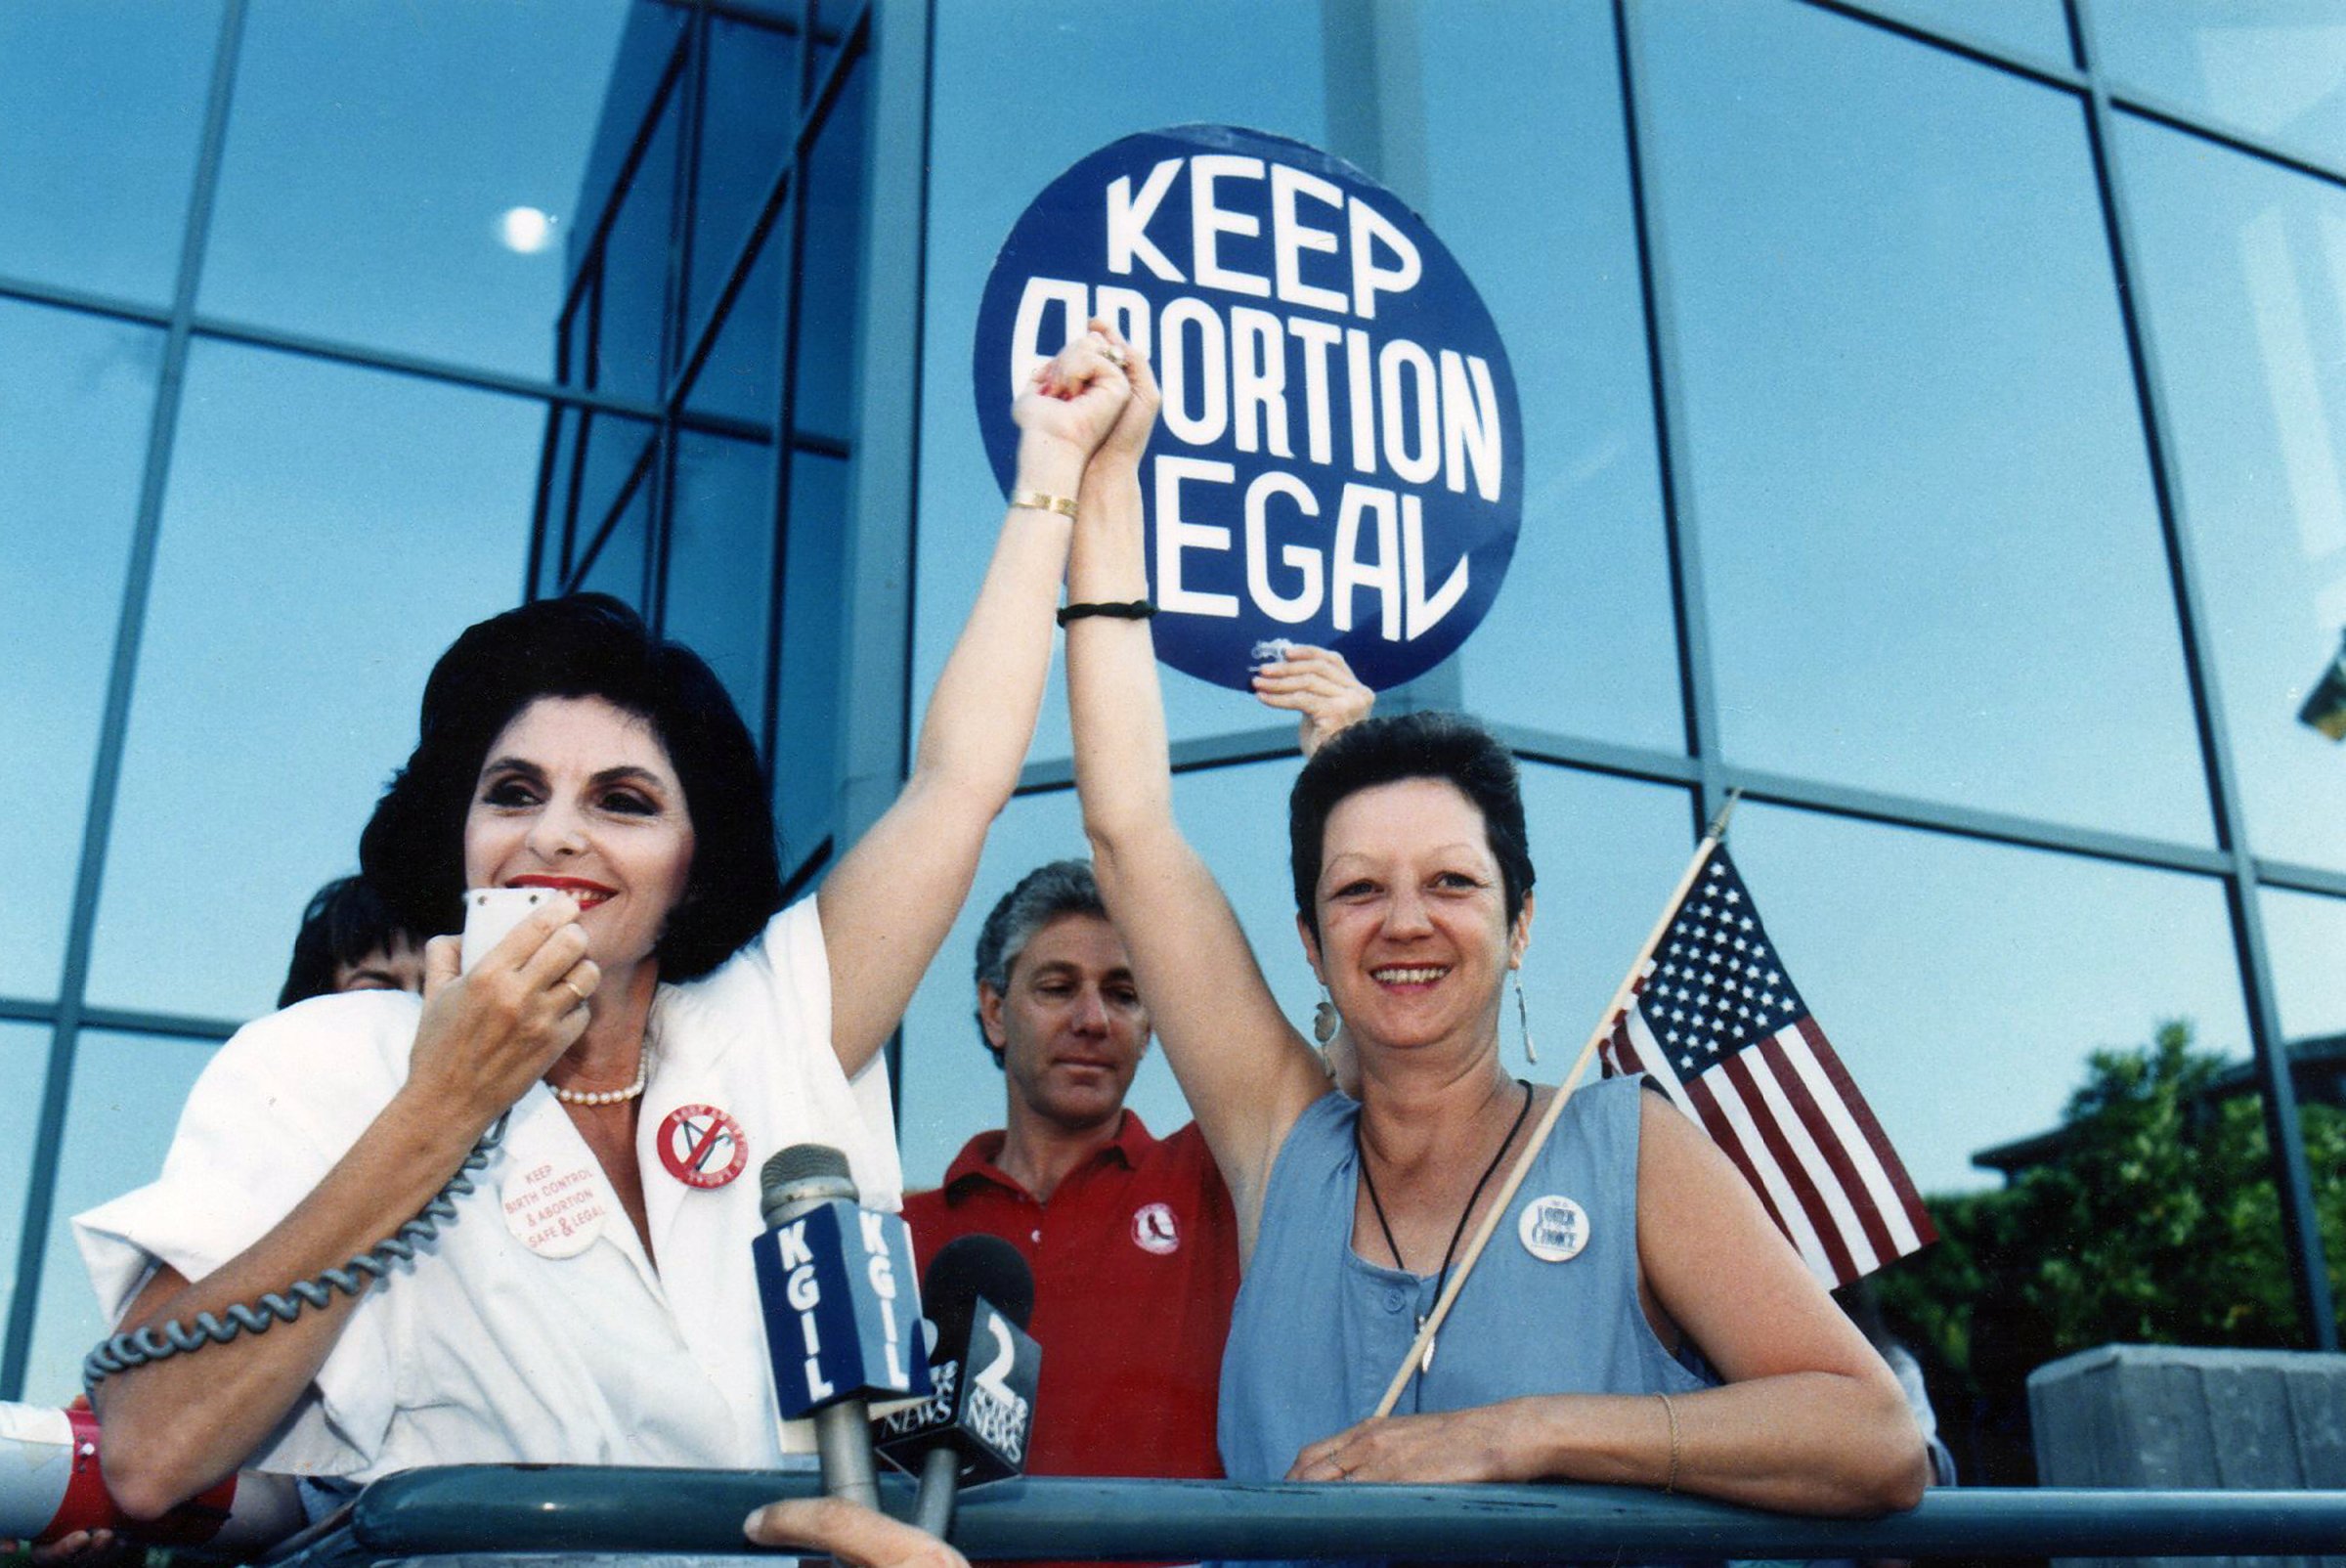 Attorney Gloria Allred and Norma McCorvey (R), the 'Jane Roe' plaintiff from the landmark court case Roe vs. Wade during an abortion rights rally, July 4, 1989 in Burbank, California.